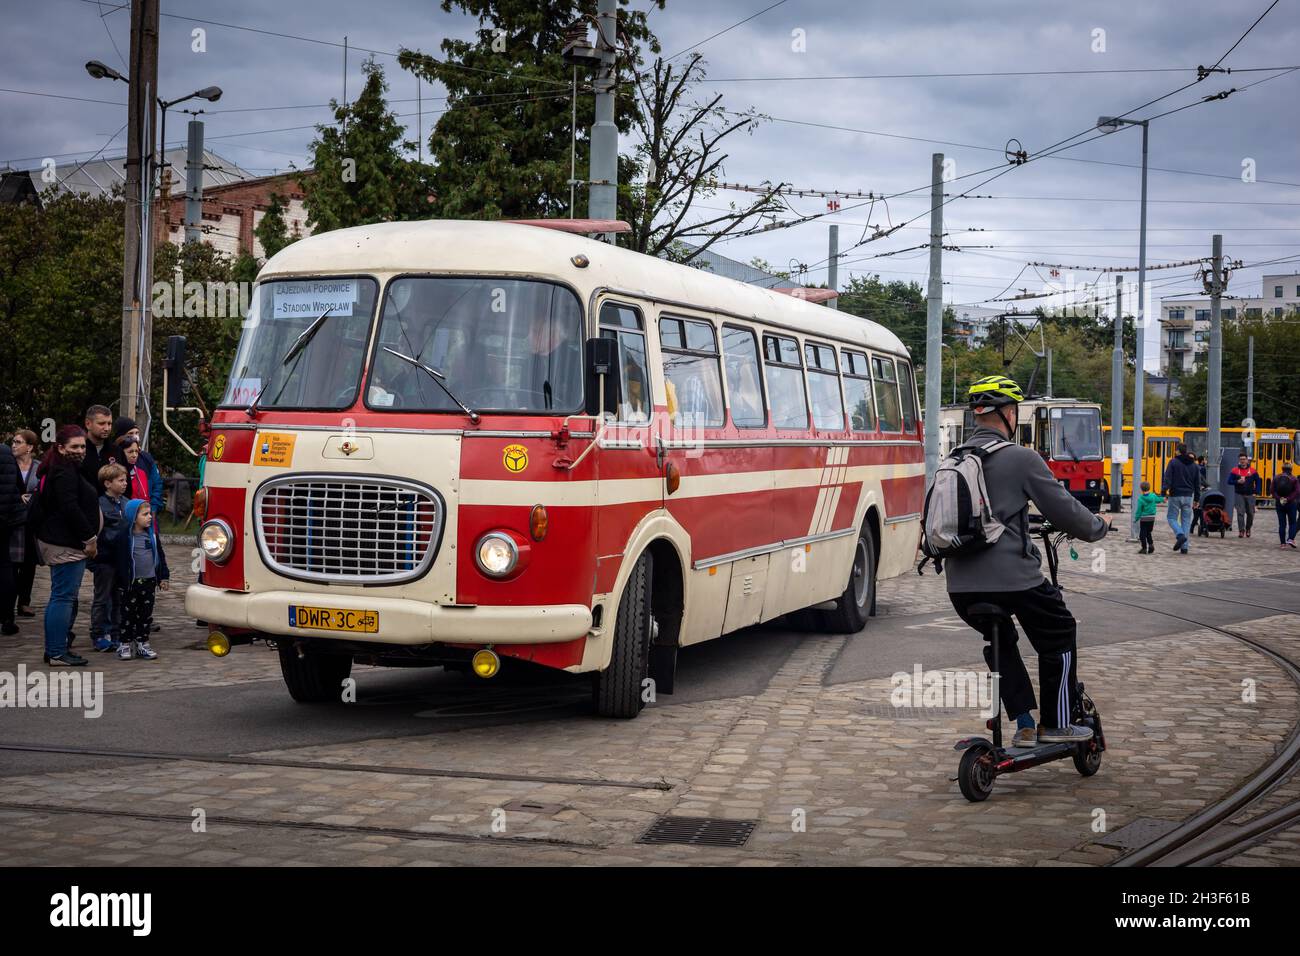 Wroclaw, Poland - September 19, 2021: A queue of passengers getting into vintage red and cream Skoda bus at the bus station. Man on the scooter in foreground. Stock Photo